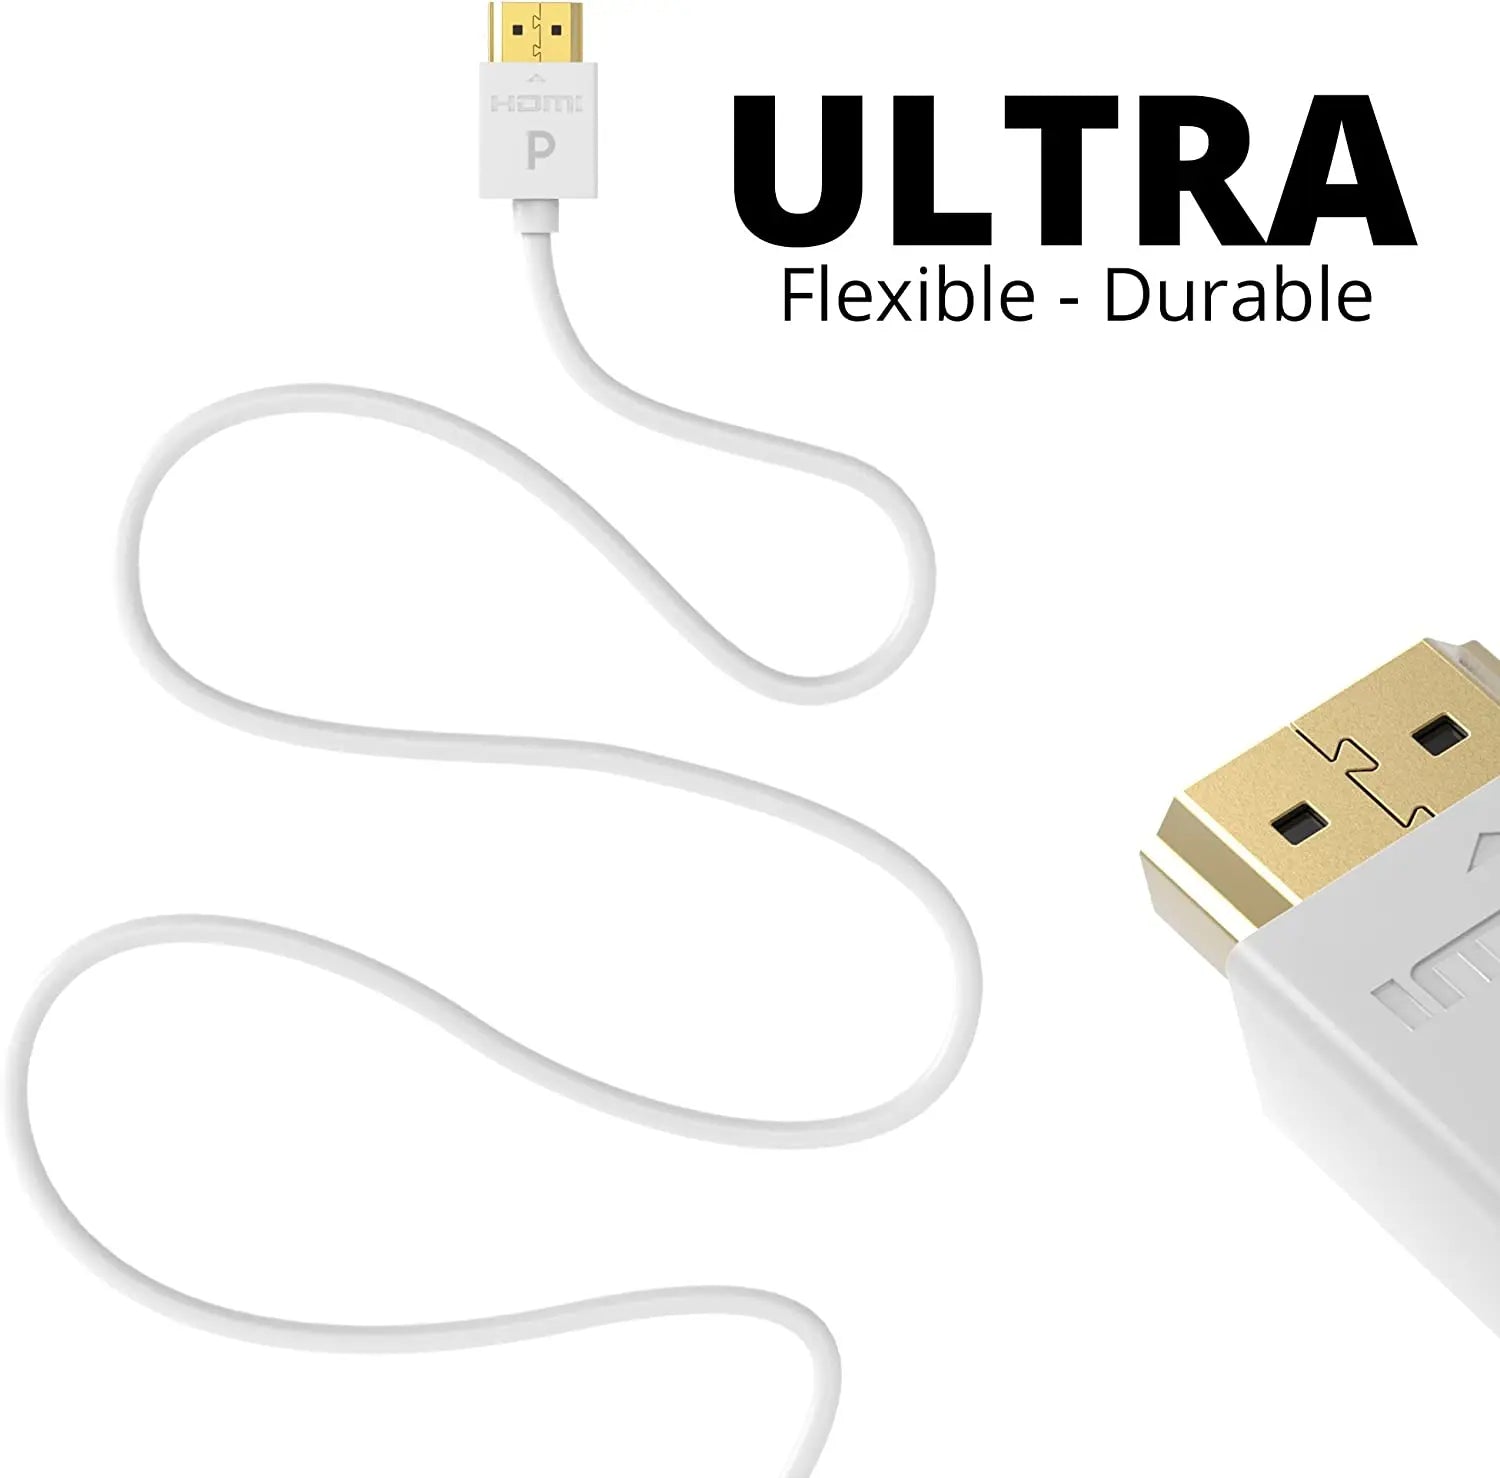 Ultra Slim & Flexible HDMI Cables 2pack